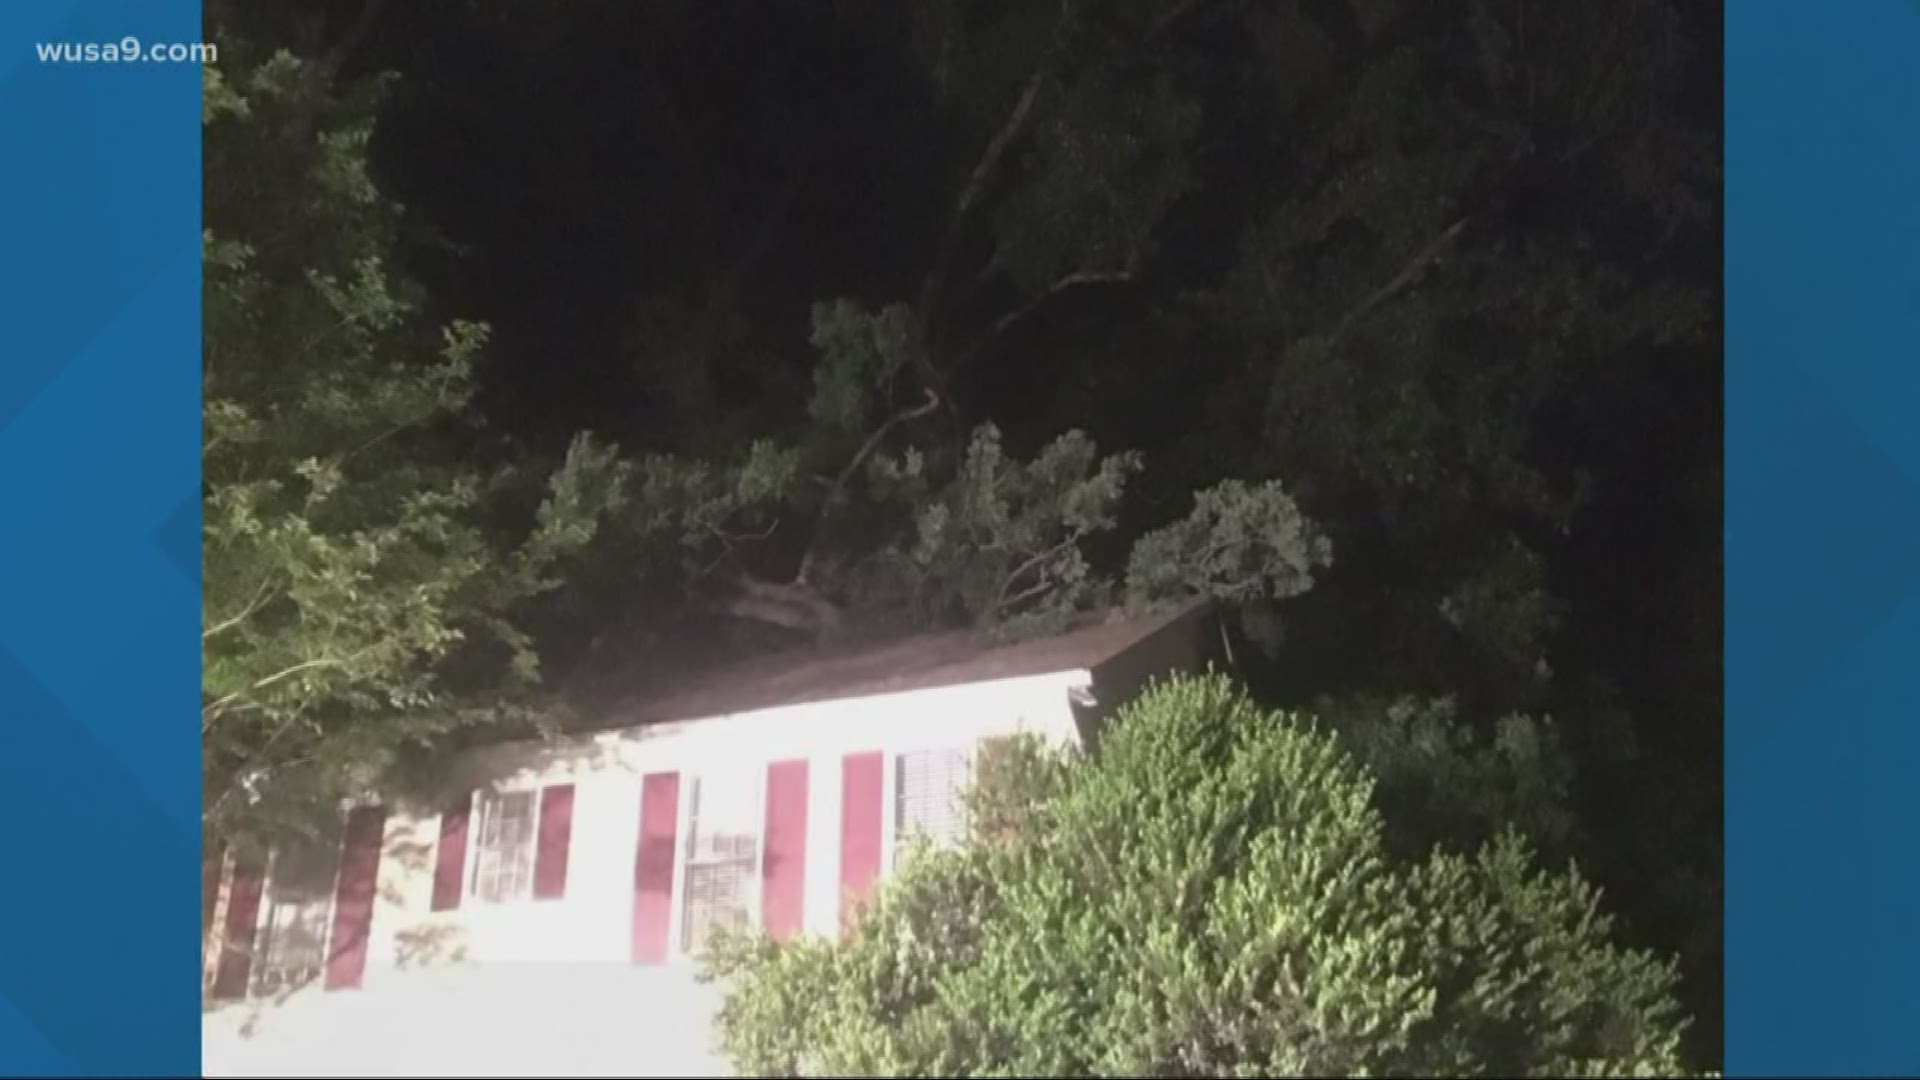 An 11-year-old escaped injury early Monday when a neighbor's tree uprooted and fell in 15 mph winds, puncturing the roof of the second-floor bedroom where the preteen was sleeping.